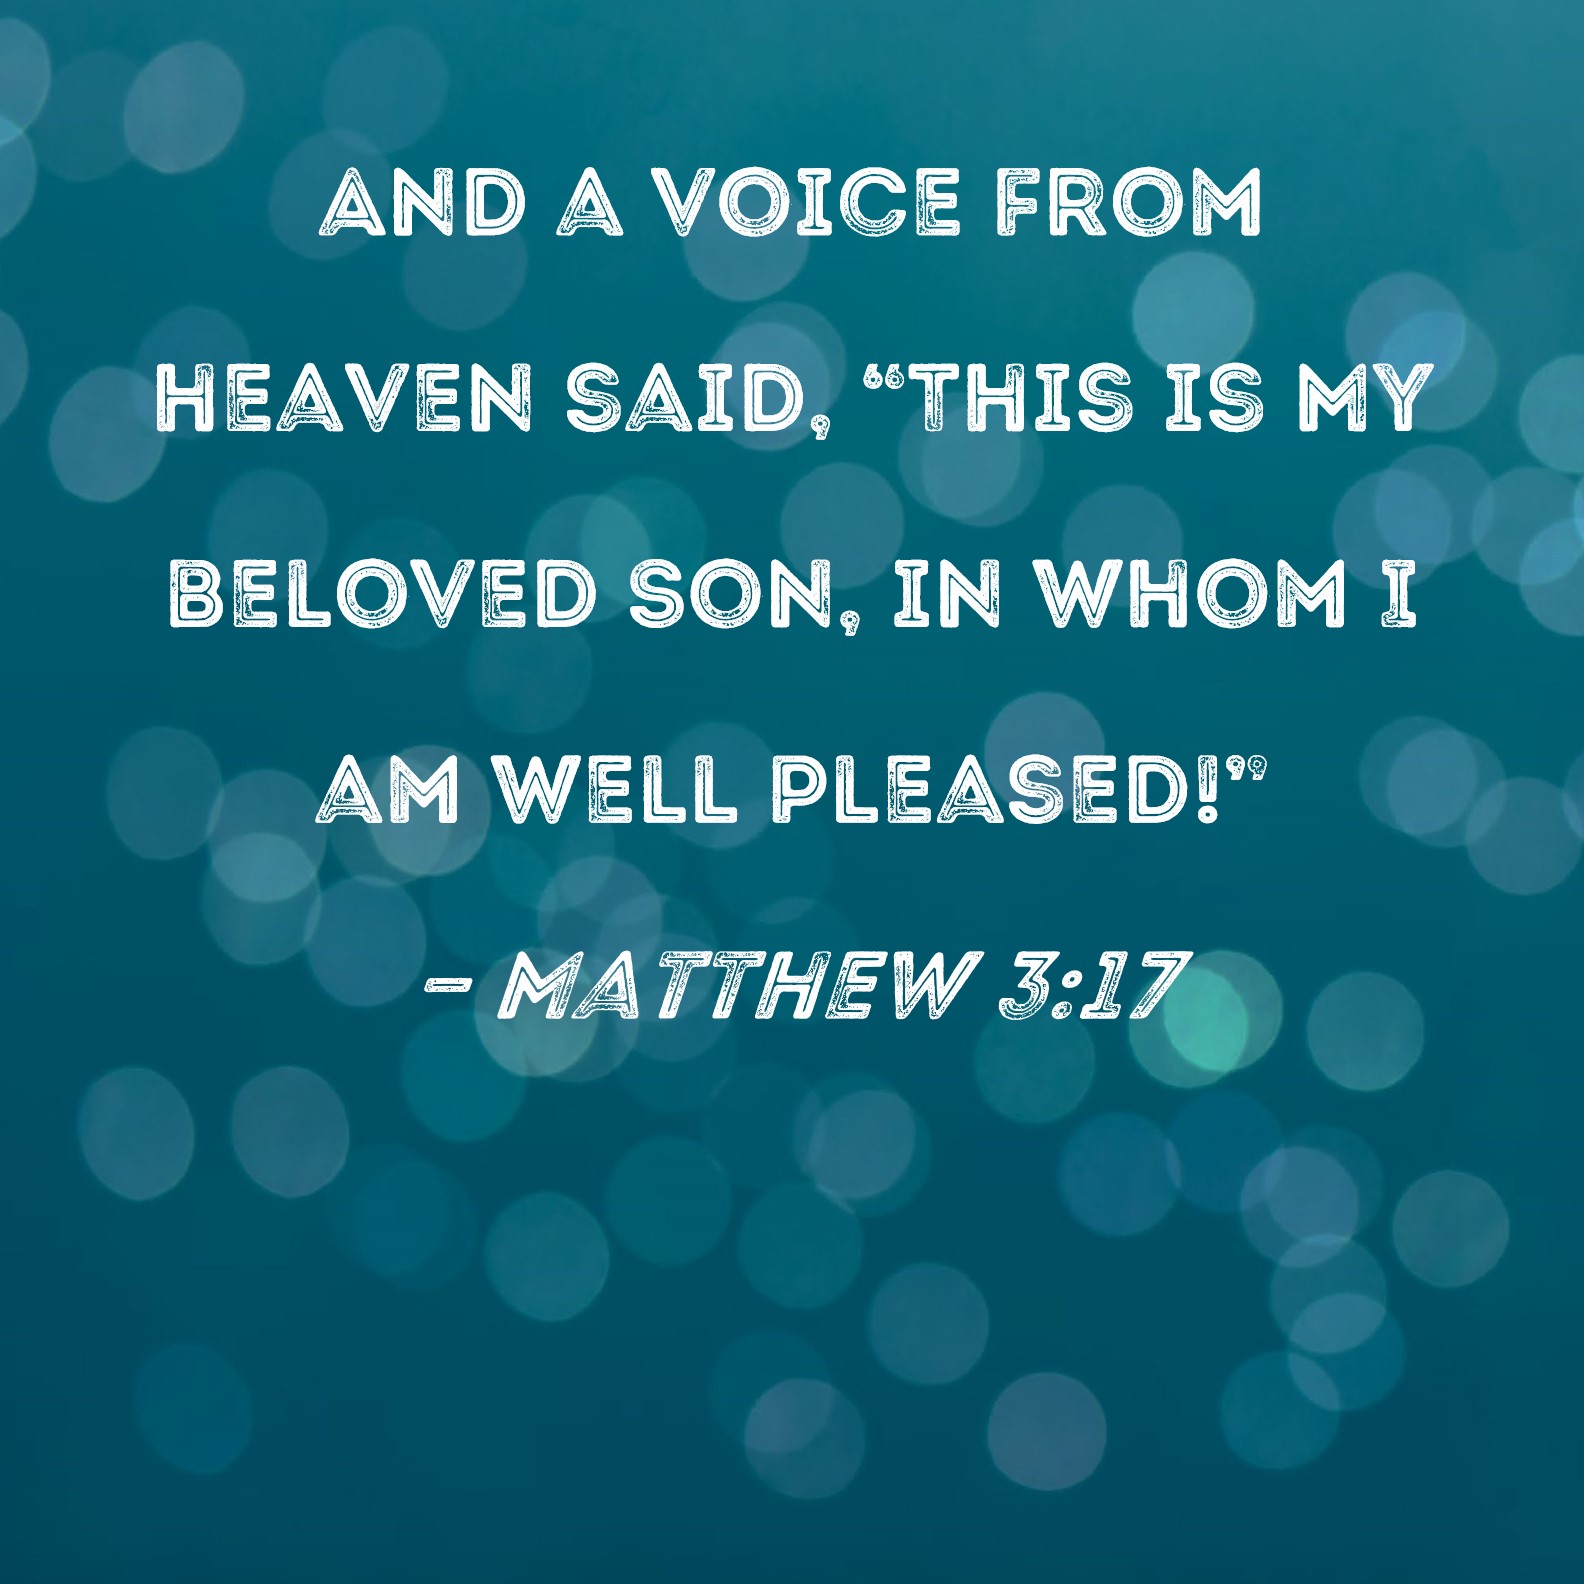 matthew-3-17-and-a-voice-from-heaven-said-this-is-my-beloved-son-in